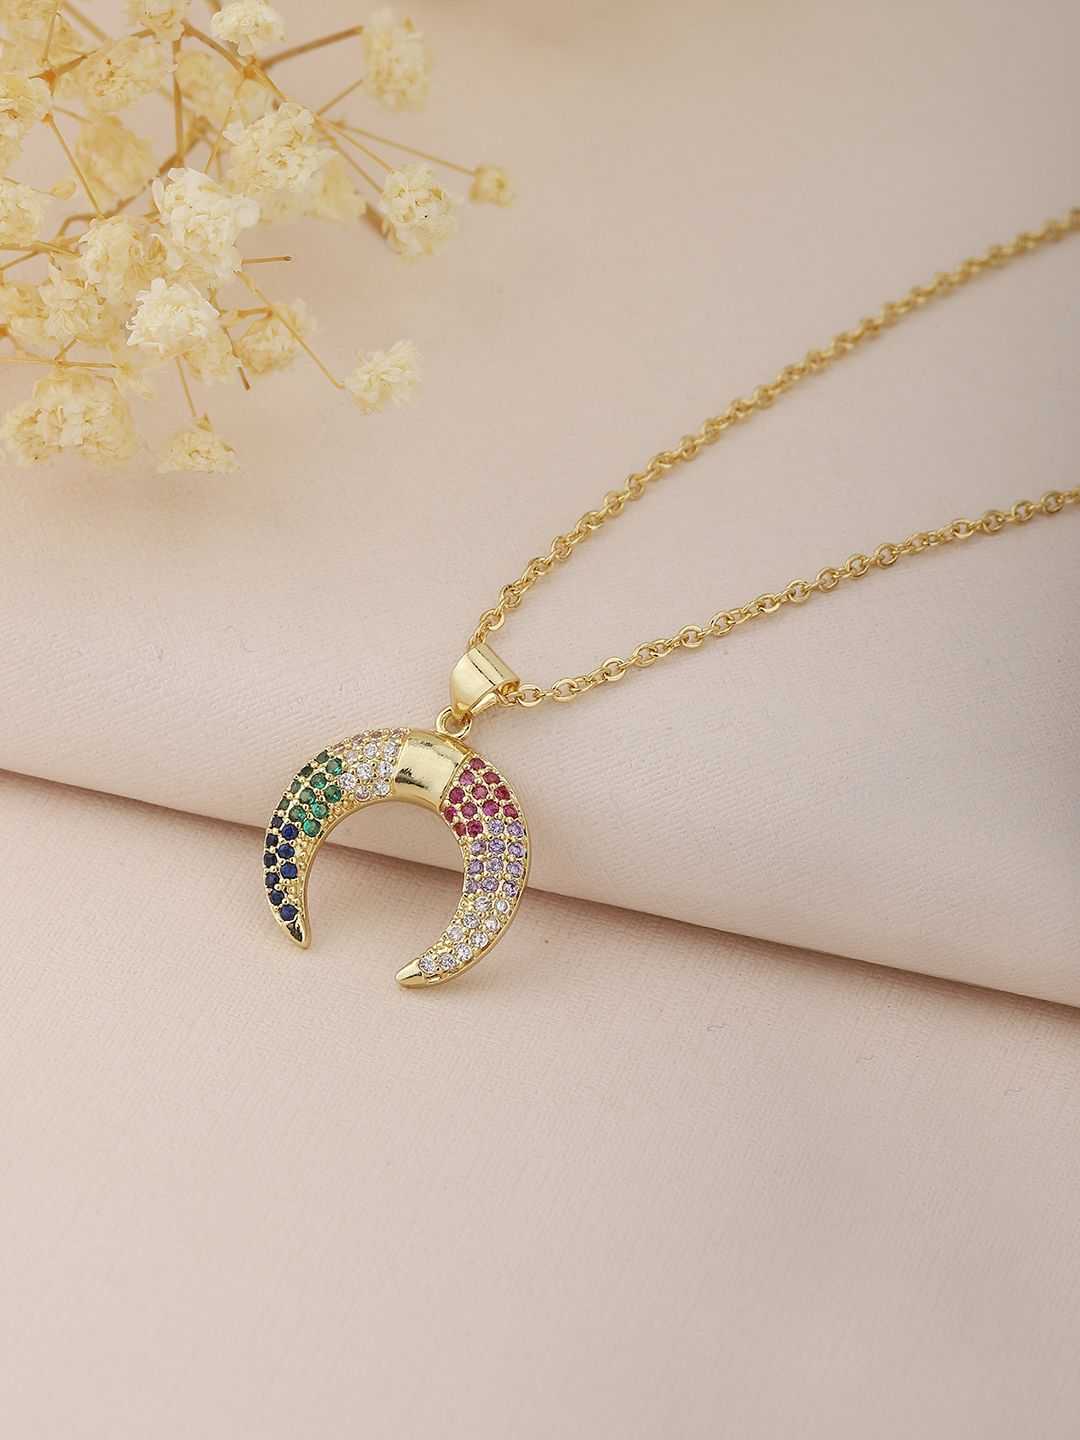 Carlton London Gold-Plated CZ-Studded Crescent Moon-Shaped Necklace Price in India